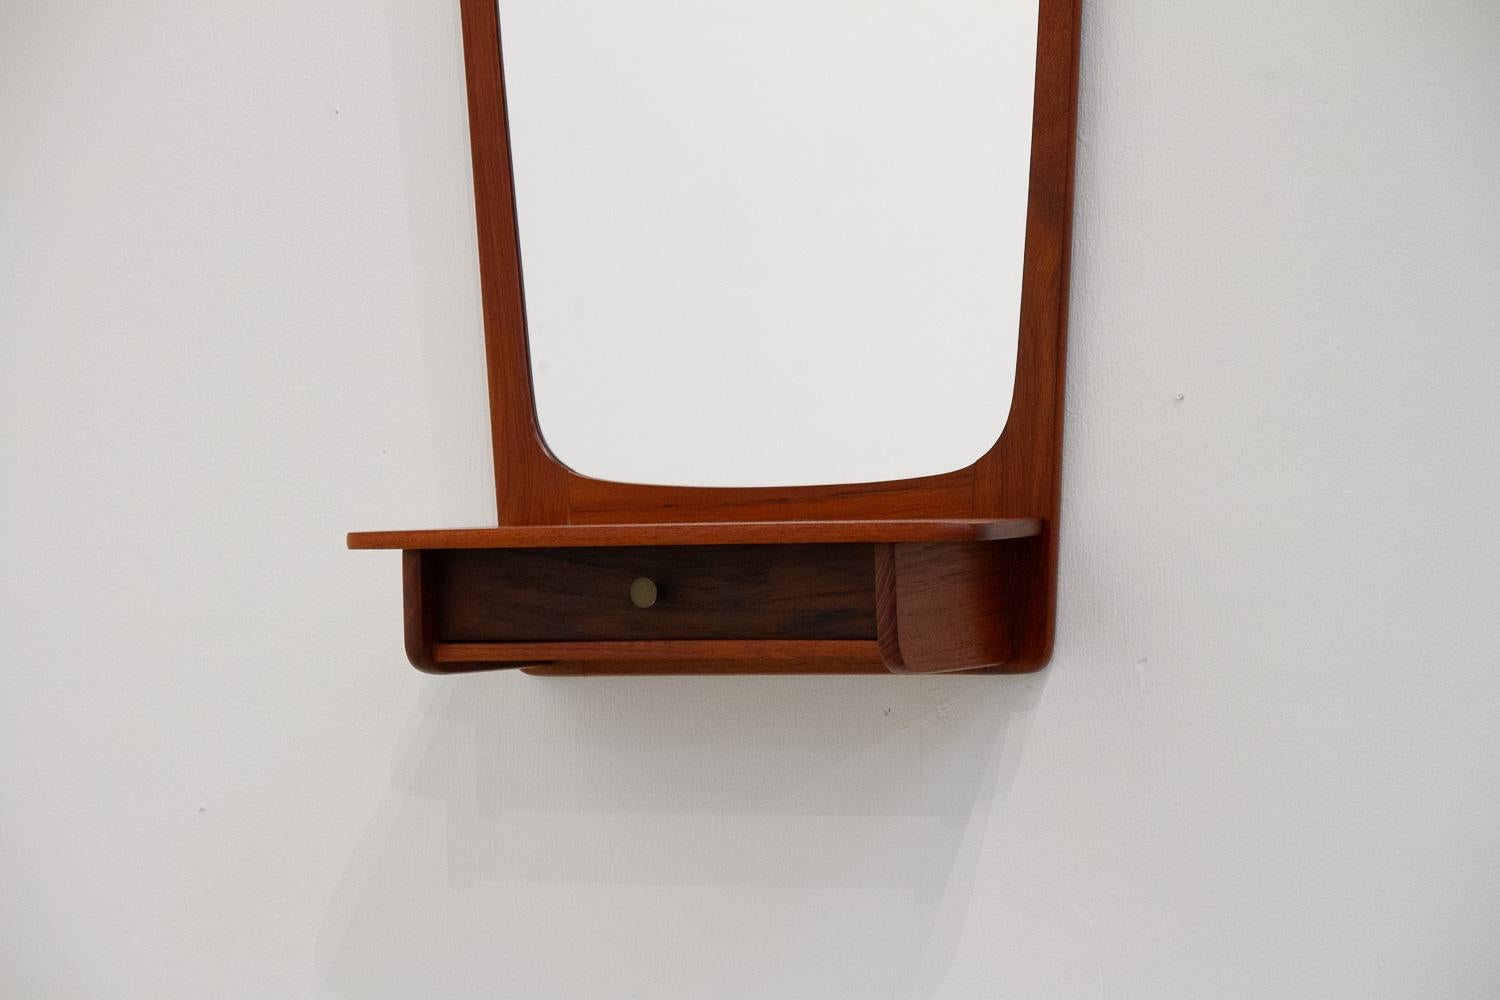 Danish Modern Teak Wall Mirror with Drawer, 1960s.
Classic and elegant Scandinavian Mid-Century Modern wall mounted mirror with shelf and small drawer. Drawer pull in solid brass.

Very good original condition with only light patina consistent with